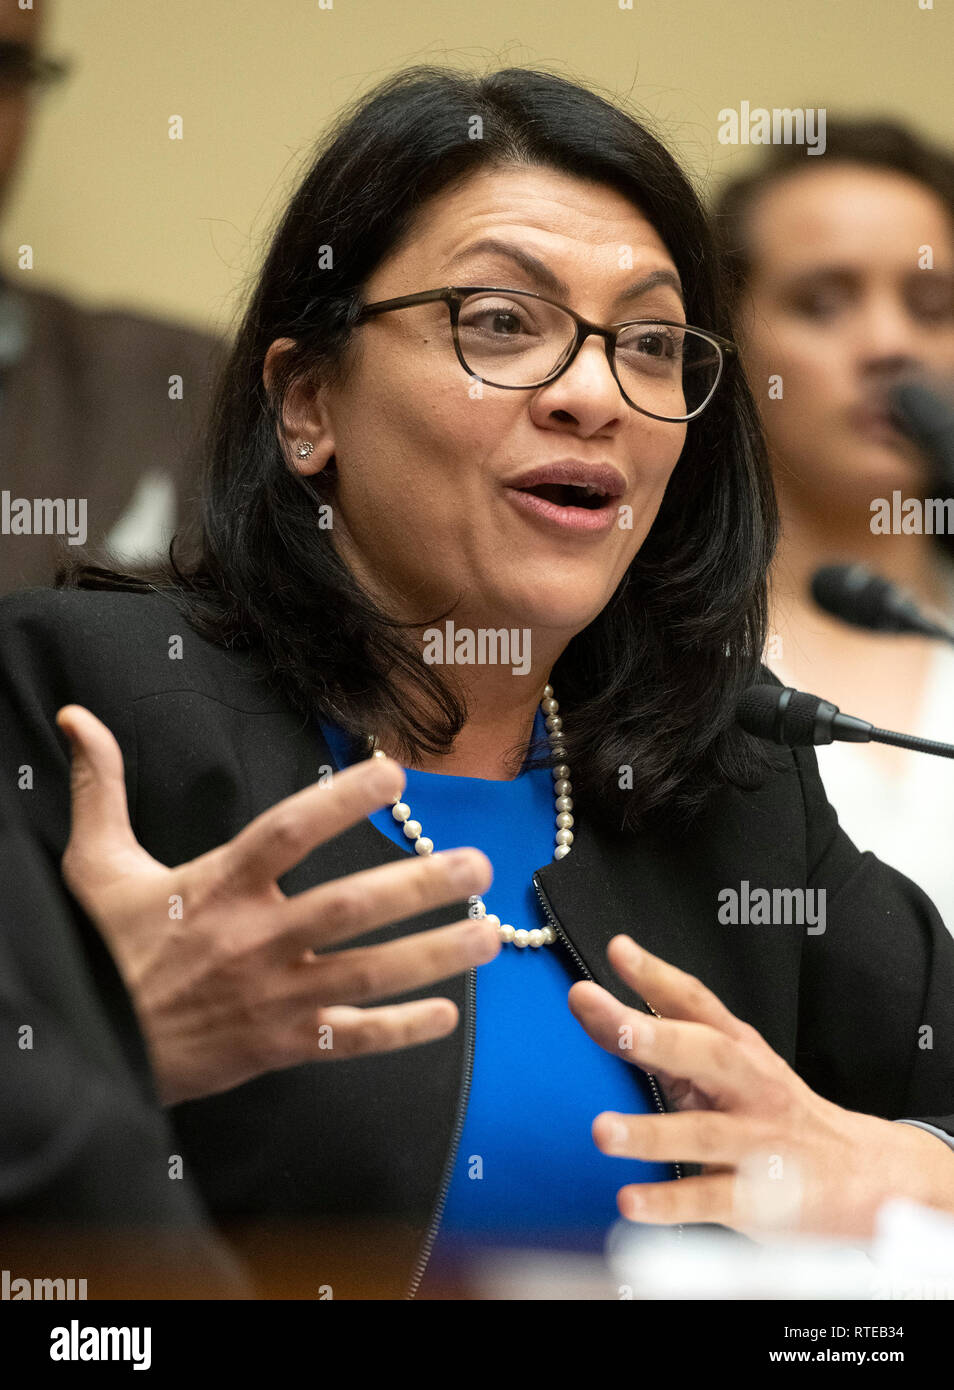 United States Representative Rashida Tlaib (Democrat of Michigan) questions Michael Cohen, Former attorney to United States President Donald J. Trump, as he testifies before the US House Committee on Oversight and Reform on Capitol Hill in Washington, DC on Wednesday, February 27, 2019. Credit: Ron Sachs / CNP/MediaPunch (RESTRICTION: NO New York or New Jersey Newspapers or newspapers within a 75 mile radius of New York City) Stock Photo